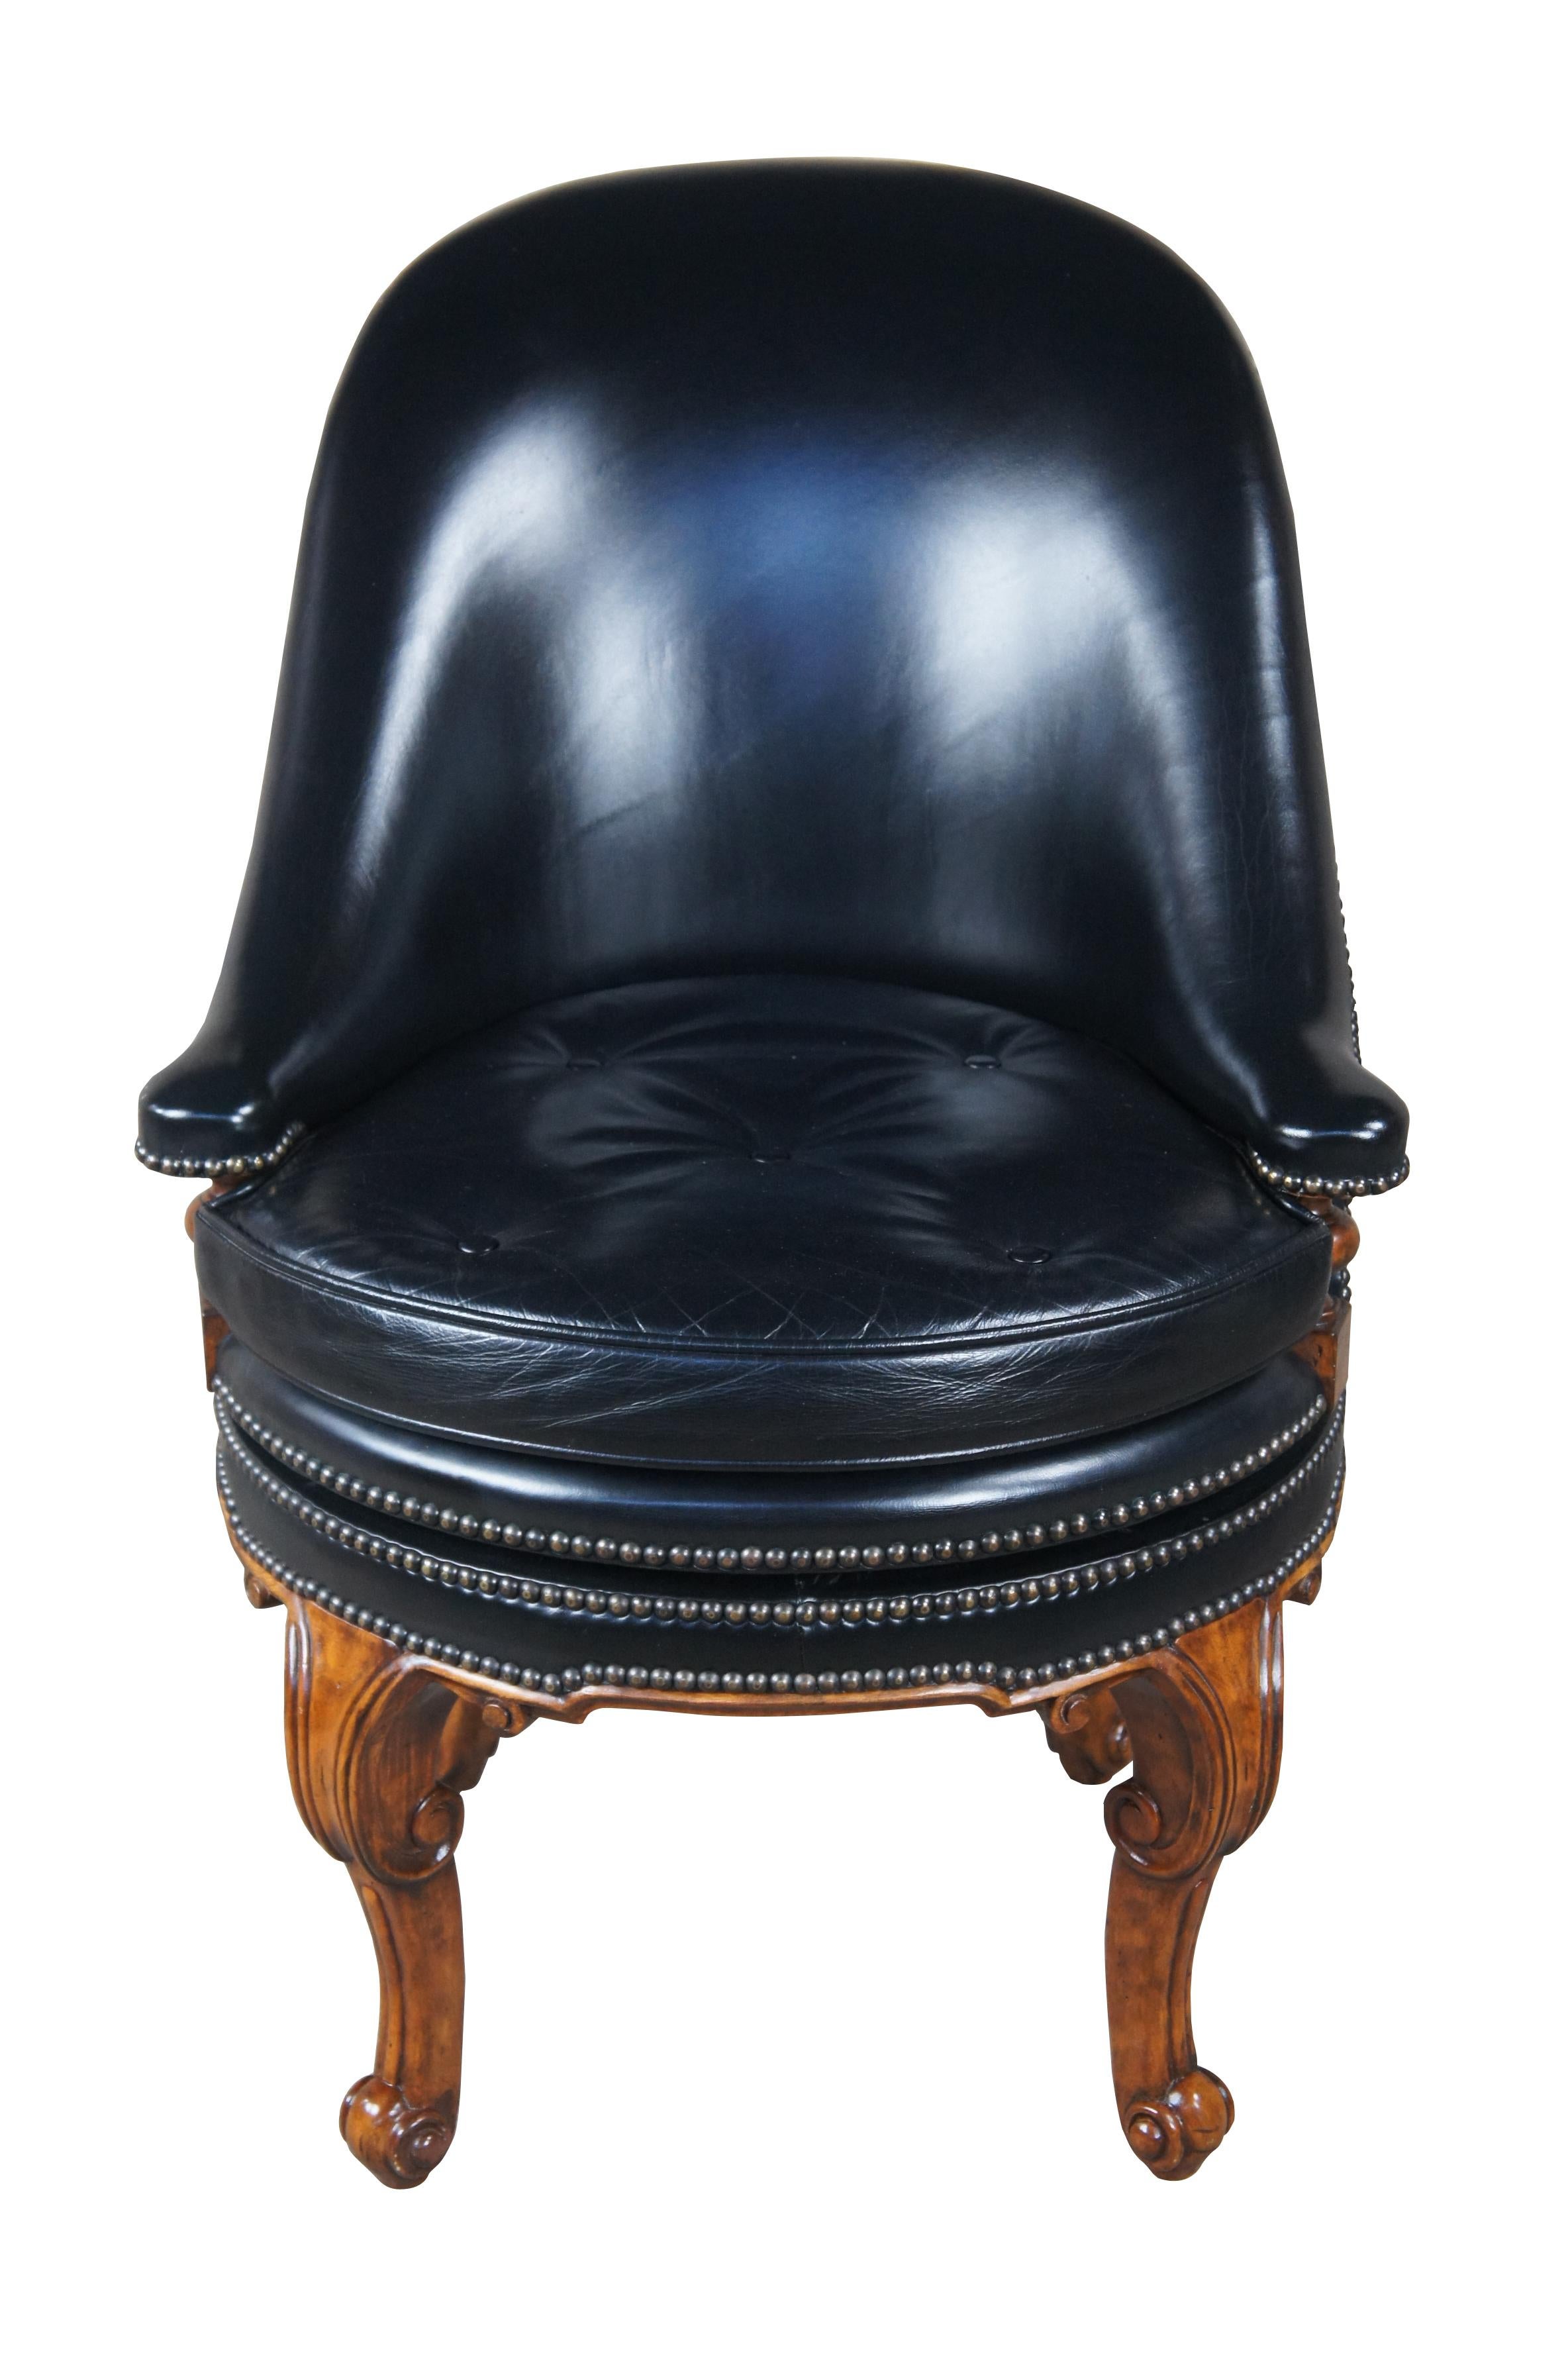 A beautiful Maitland Smith game, desk or occasional chair, 4330-810. French inspired with Napoleon Brown finished cabriole legs and Hemingway Black leather upholstery with brass tack accents and button tufted seat. The chair has a 90 degree swivel